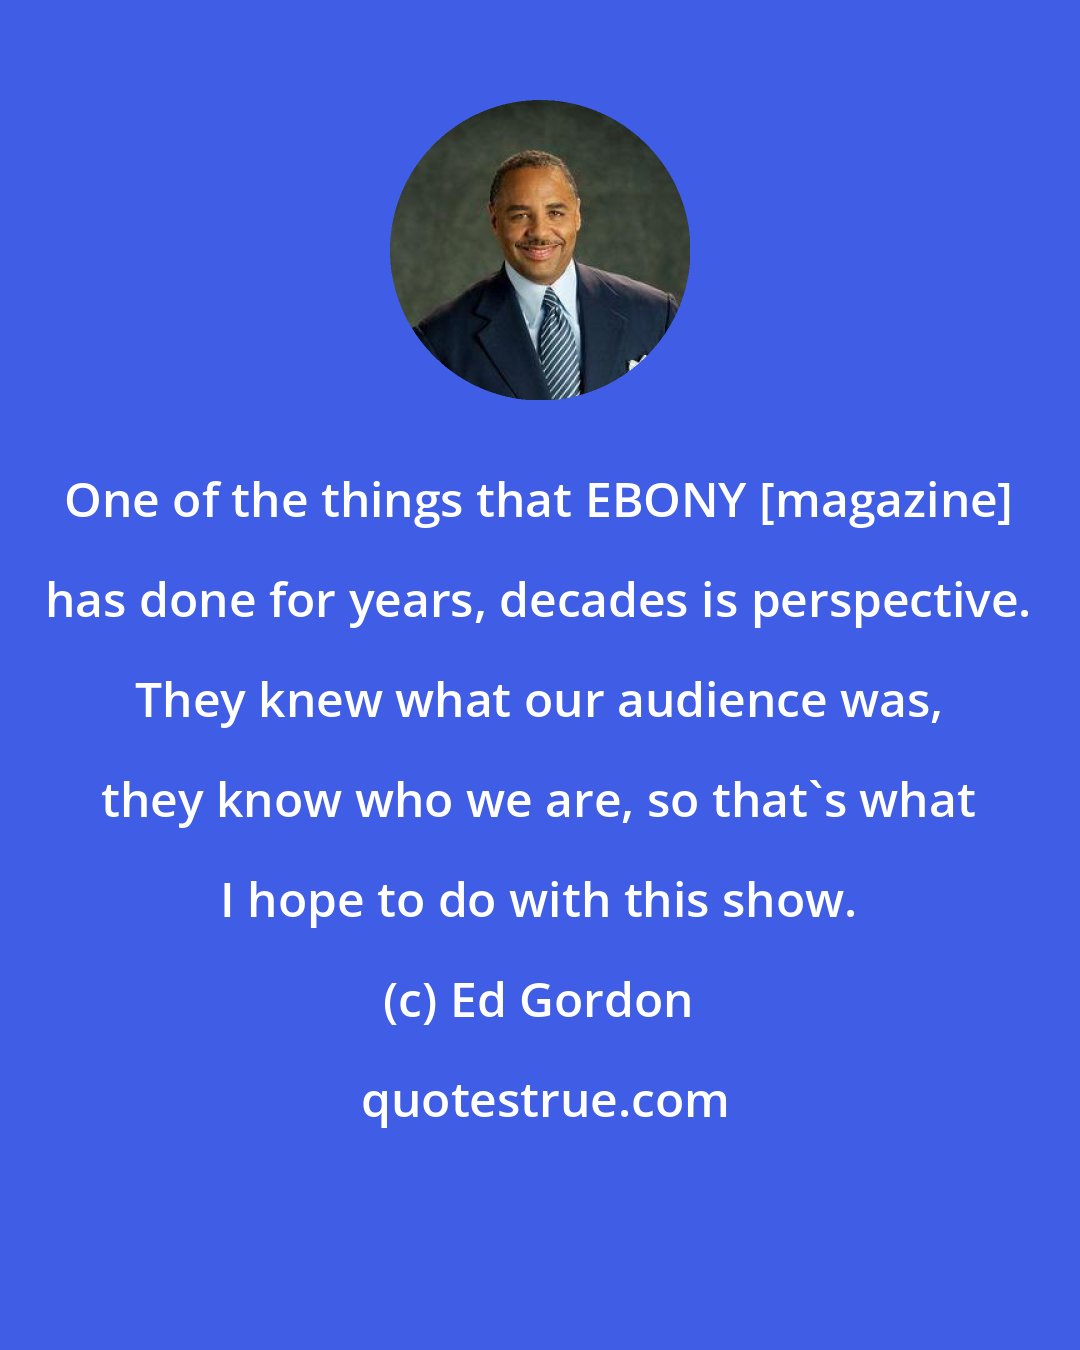 Ed Gordon: One of the things that EBONY [magazine] has done for years, decades is perspective. They knew what our audience was, they know who we are, so that's what I hope to do with this show.